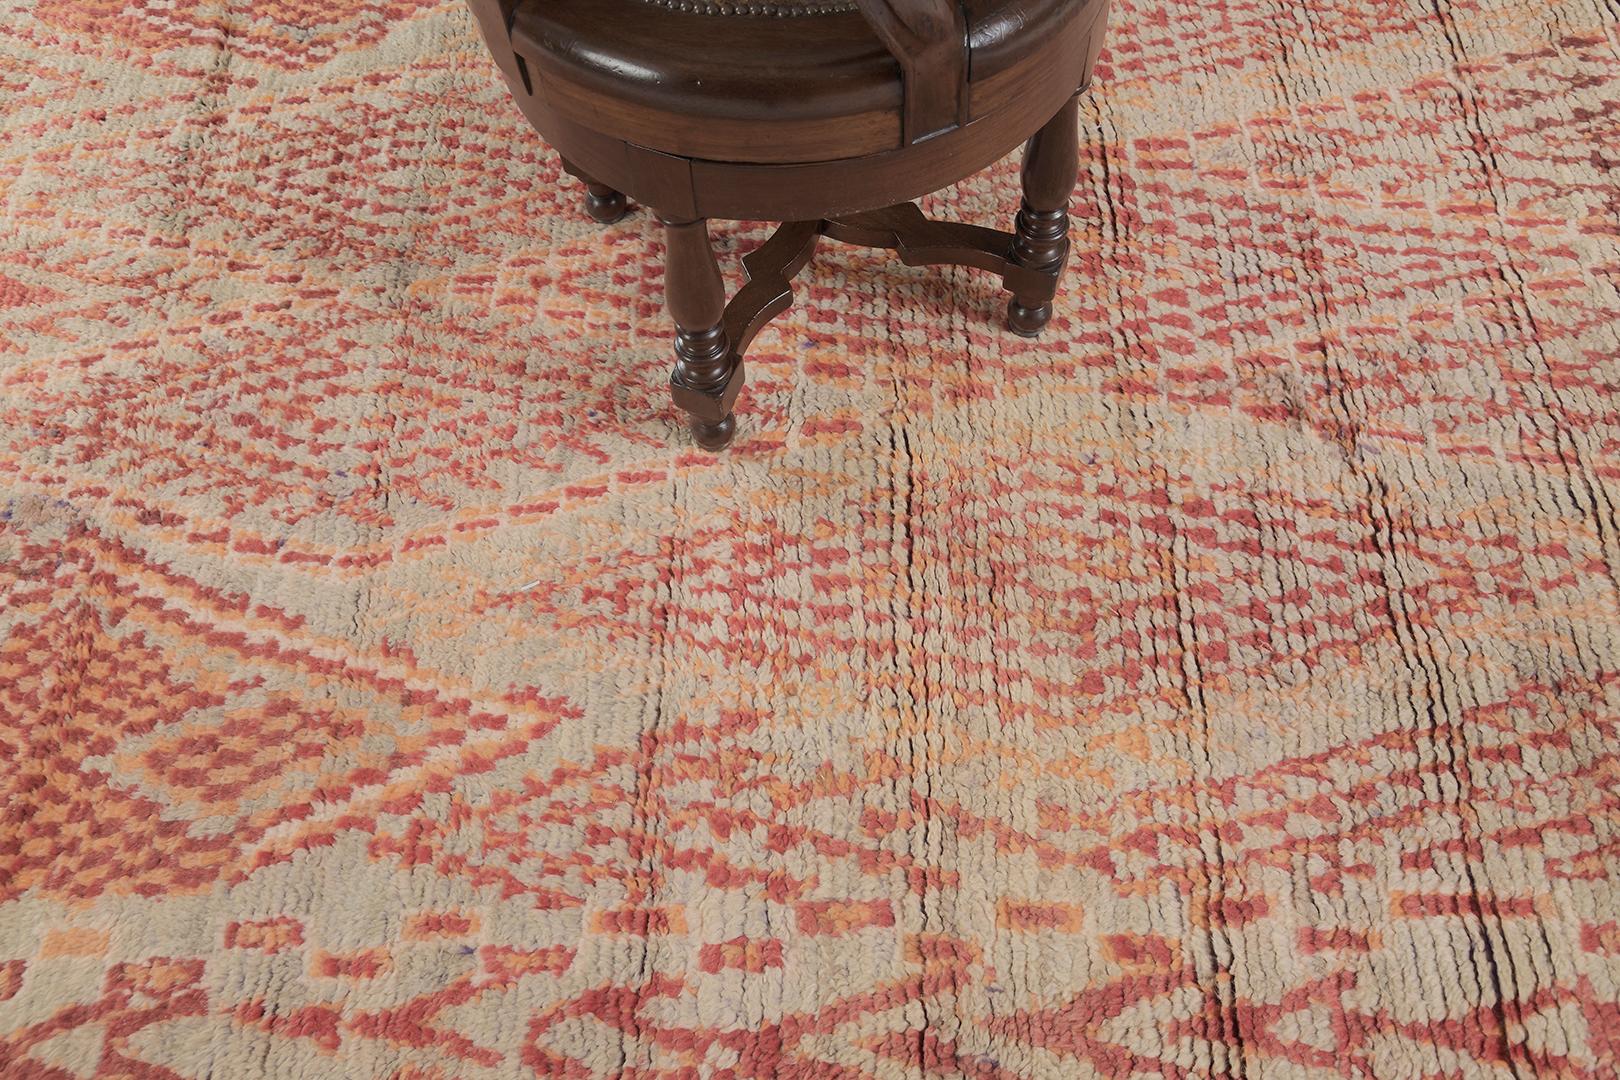 The astonishing fiery color scheme features the soft and delicate traditional Beni M'Guild Moroccan Rug. The texture, line works, and energetic vibes match with the energy of a playful and enthusiastic ambiance. A charming interior makes the